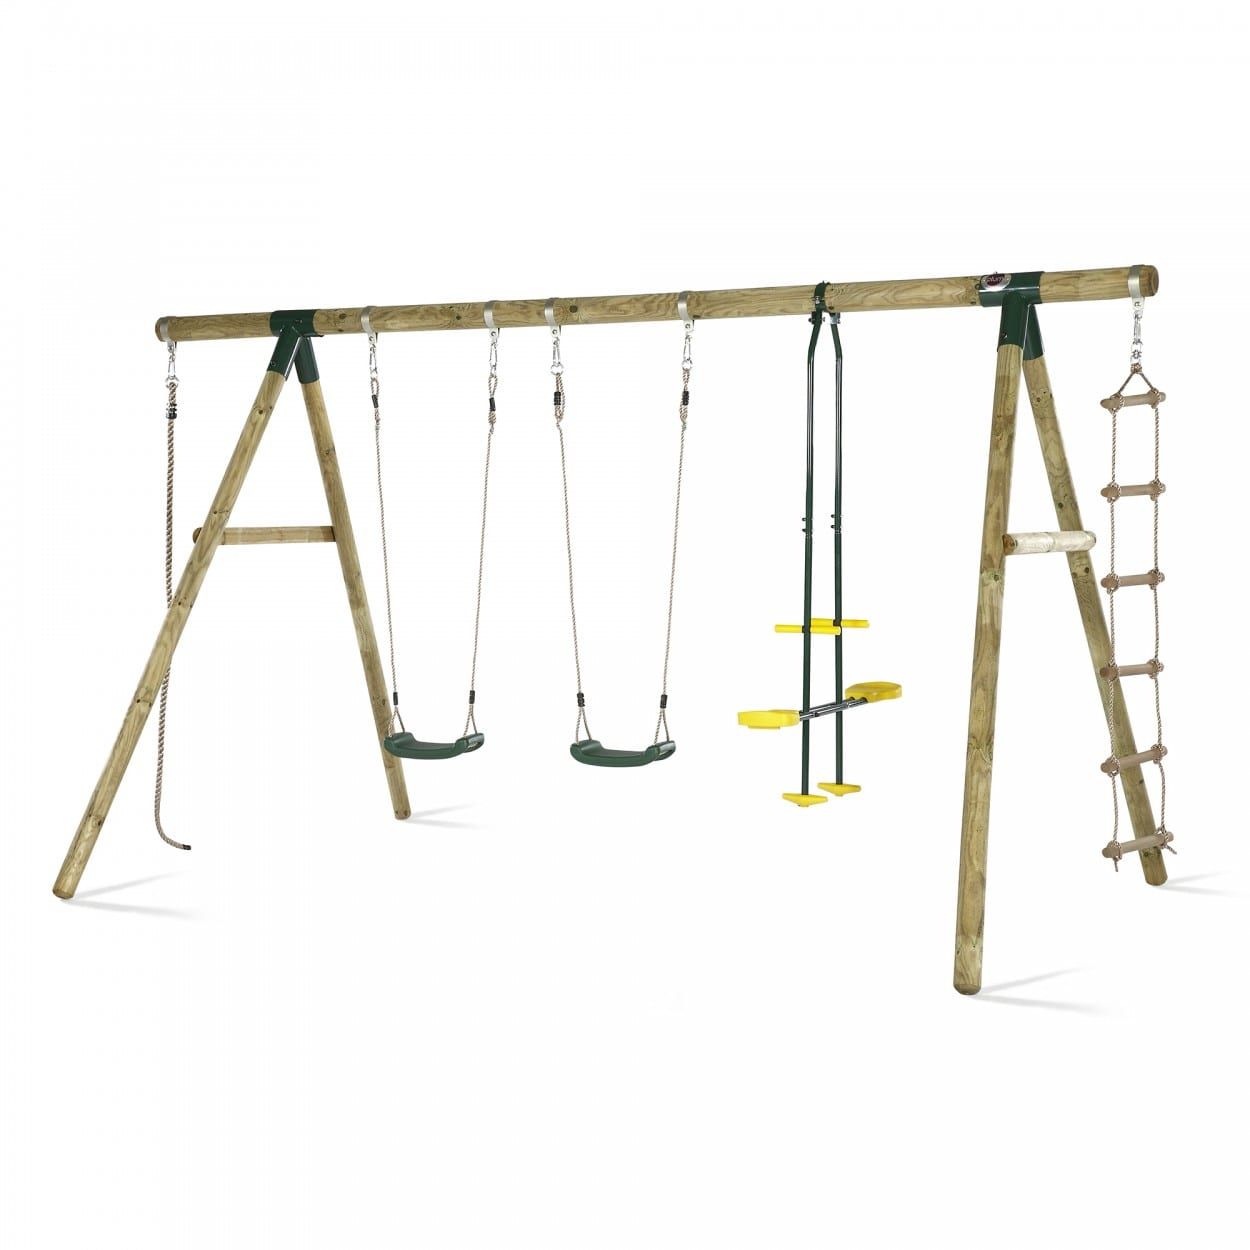 Plum® Orang Utan® Wooden Garden Swing Set In Dual Rider Glider Swings With Soft Touch Rope (View 19 of 25)